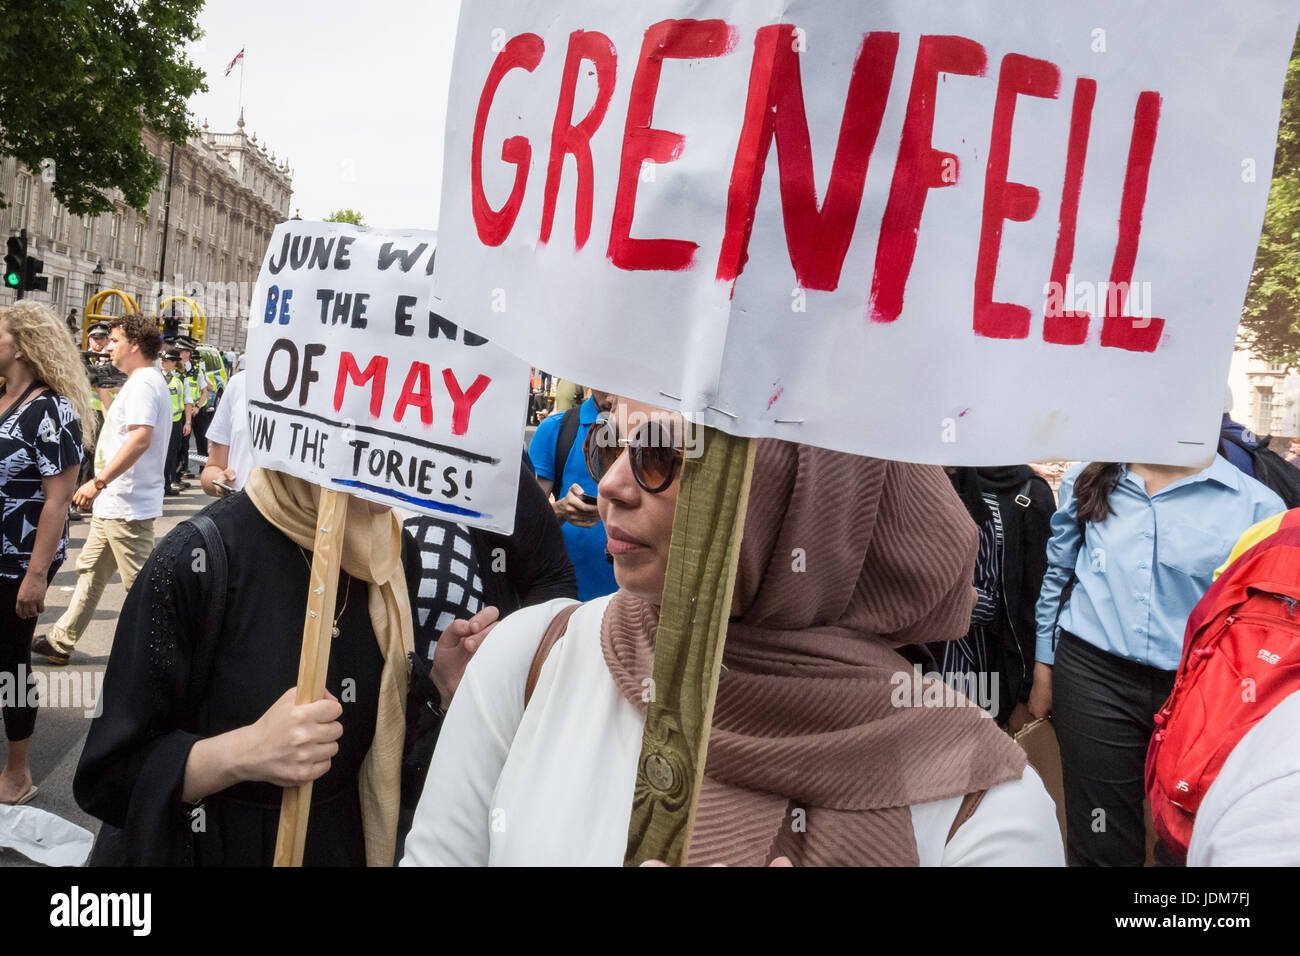 London, UK. 21st June, 2017. “Day of Rage” march and protest in Westminster after the Queen's Speech. Many were demanding Justice for the victims of the Grenfell Tower fire disaster whilst others voiced support for Jeremy Corbyn and the Labour party. © Guy Corbishley/Alamy Live News Stock Photo